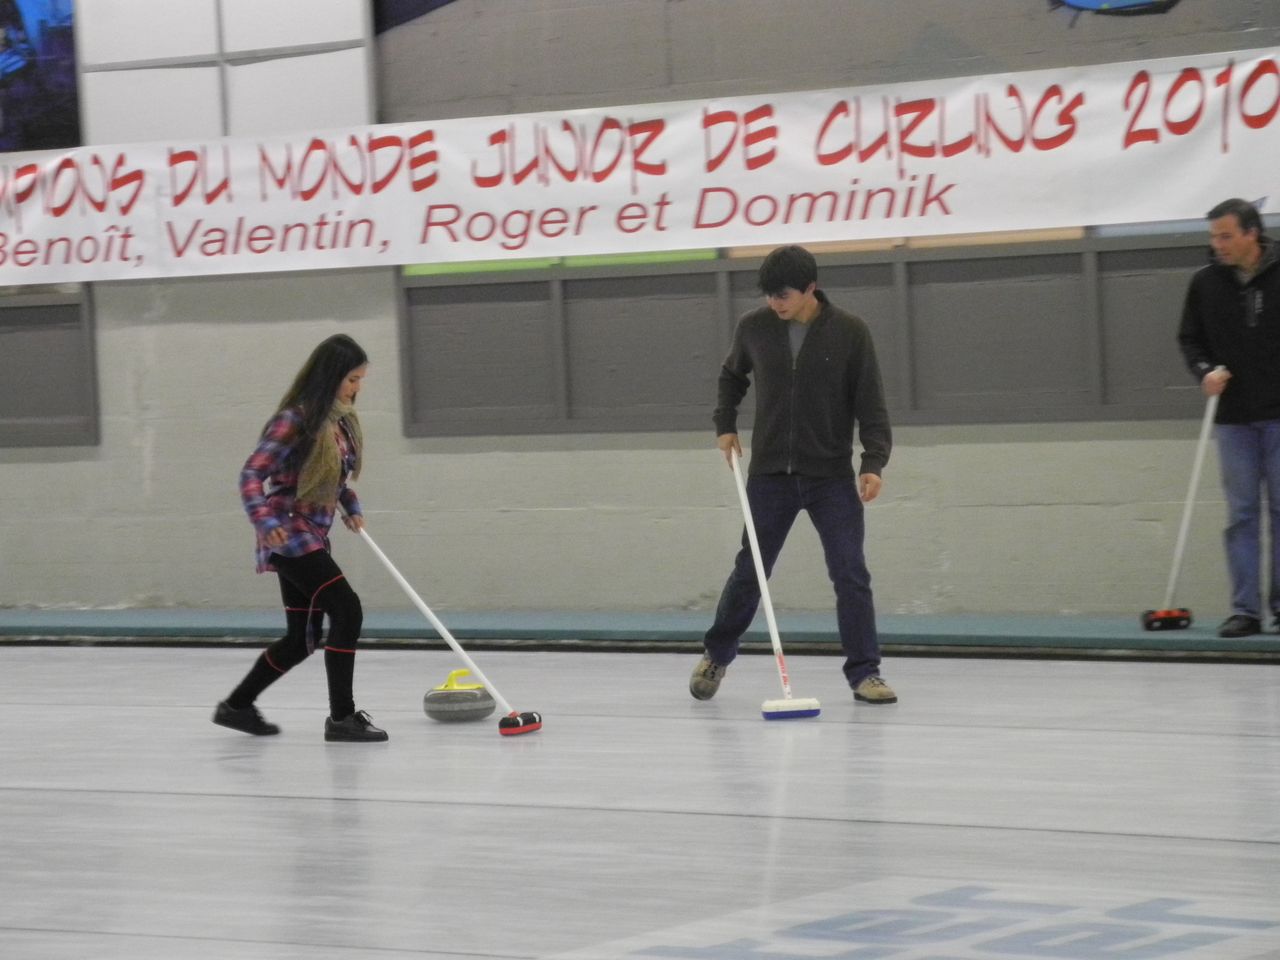 /photos/2013/S01_Curling/121011_2102-S01-MD_14.jpg